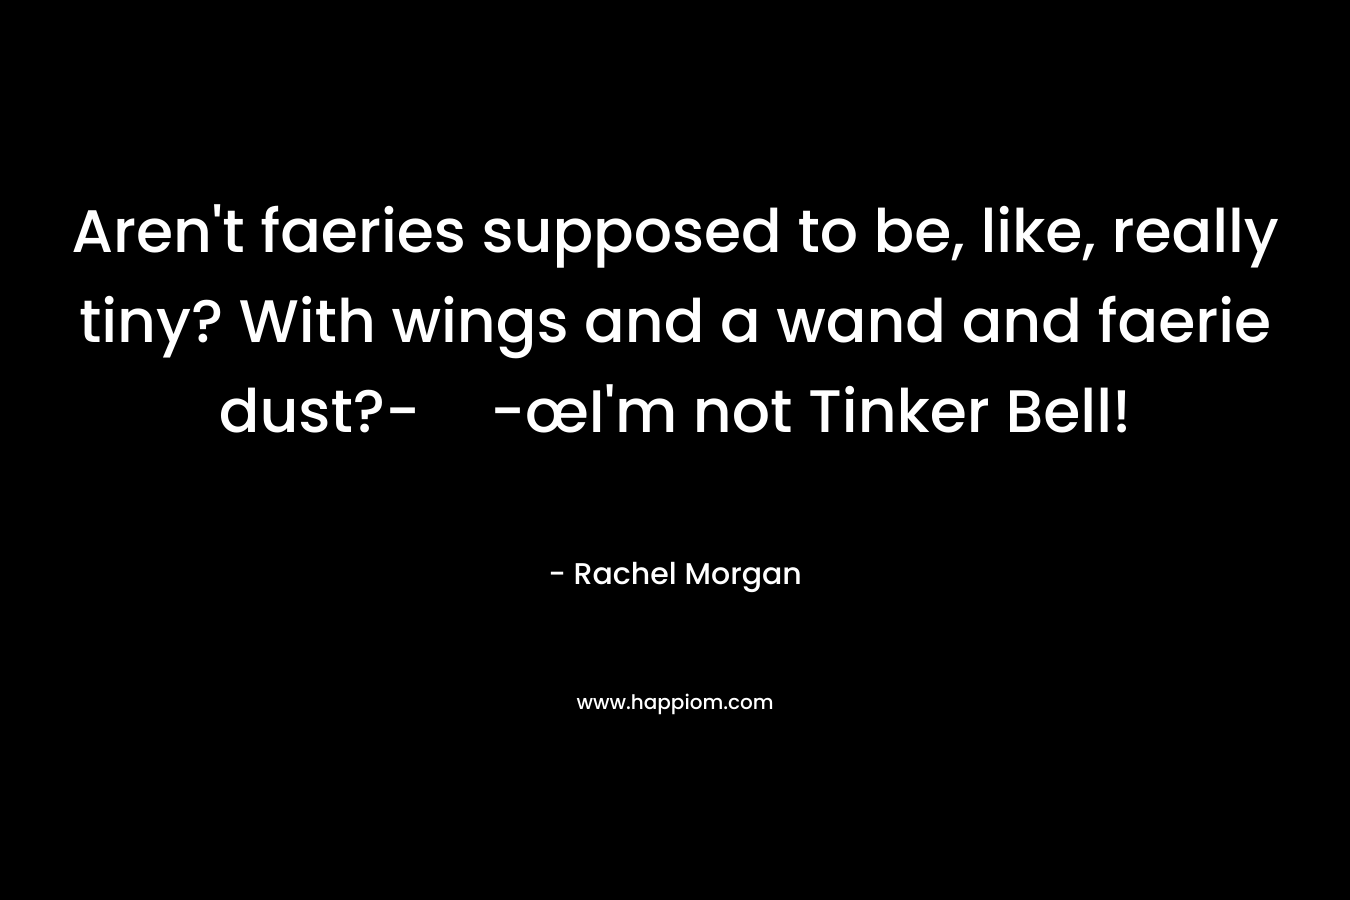 Aren’t faeries supposed to be, like, really tiny? With wings and a wand and faerie dust?--œI’m not Tinker Bell! – Rachel Morgan